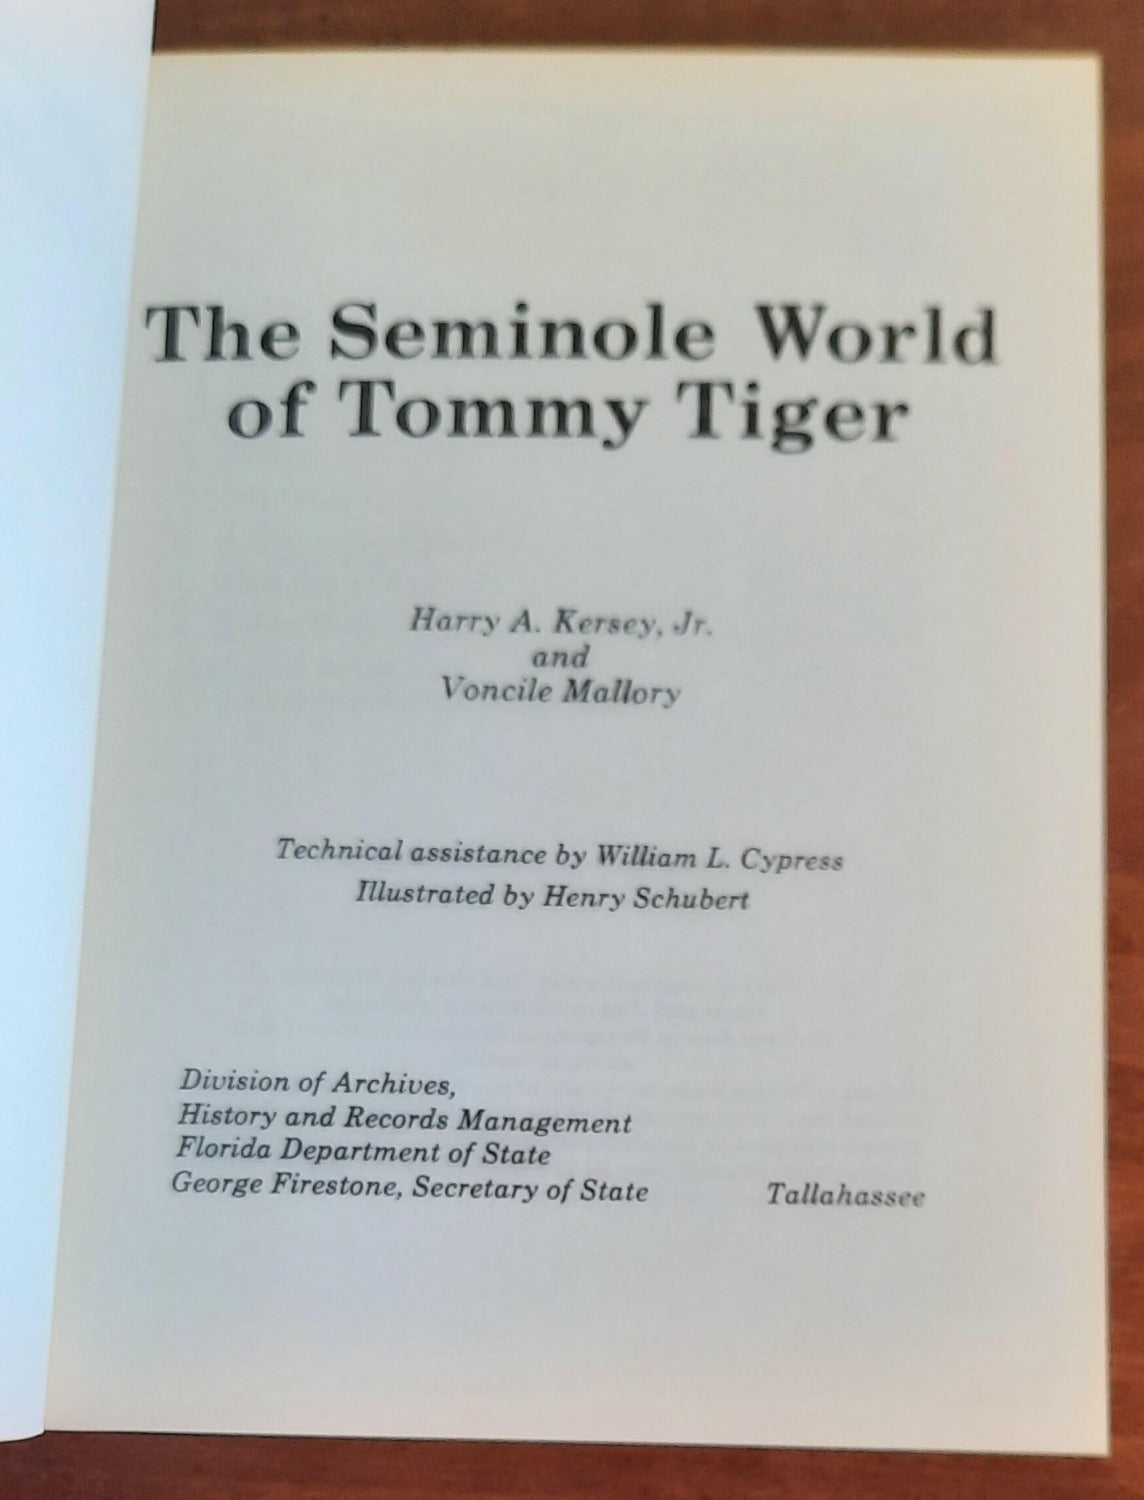 The Seminole World of Tommy Tiger